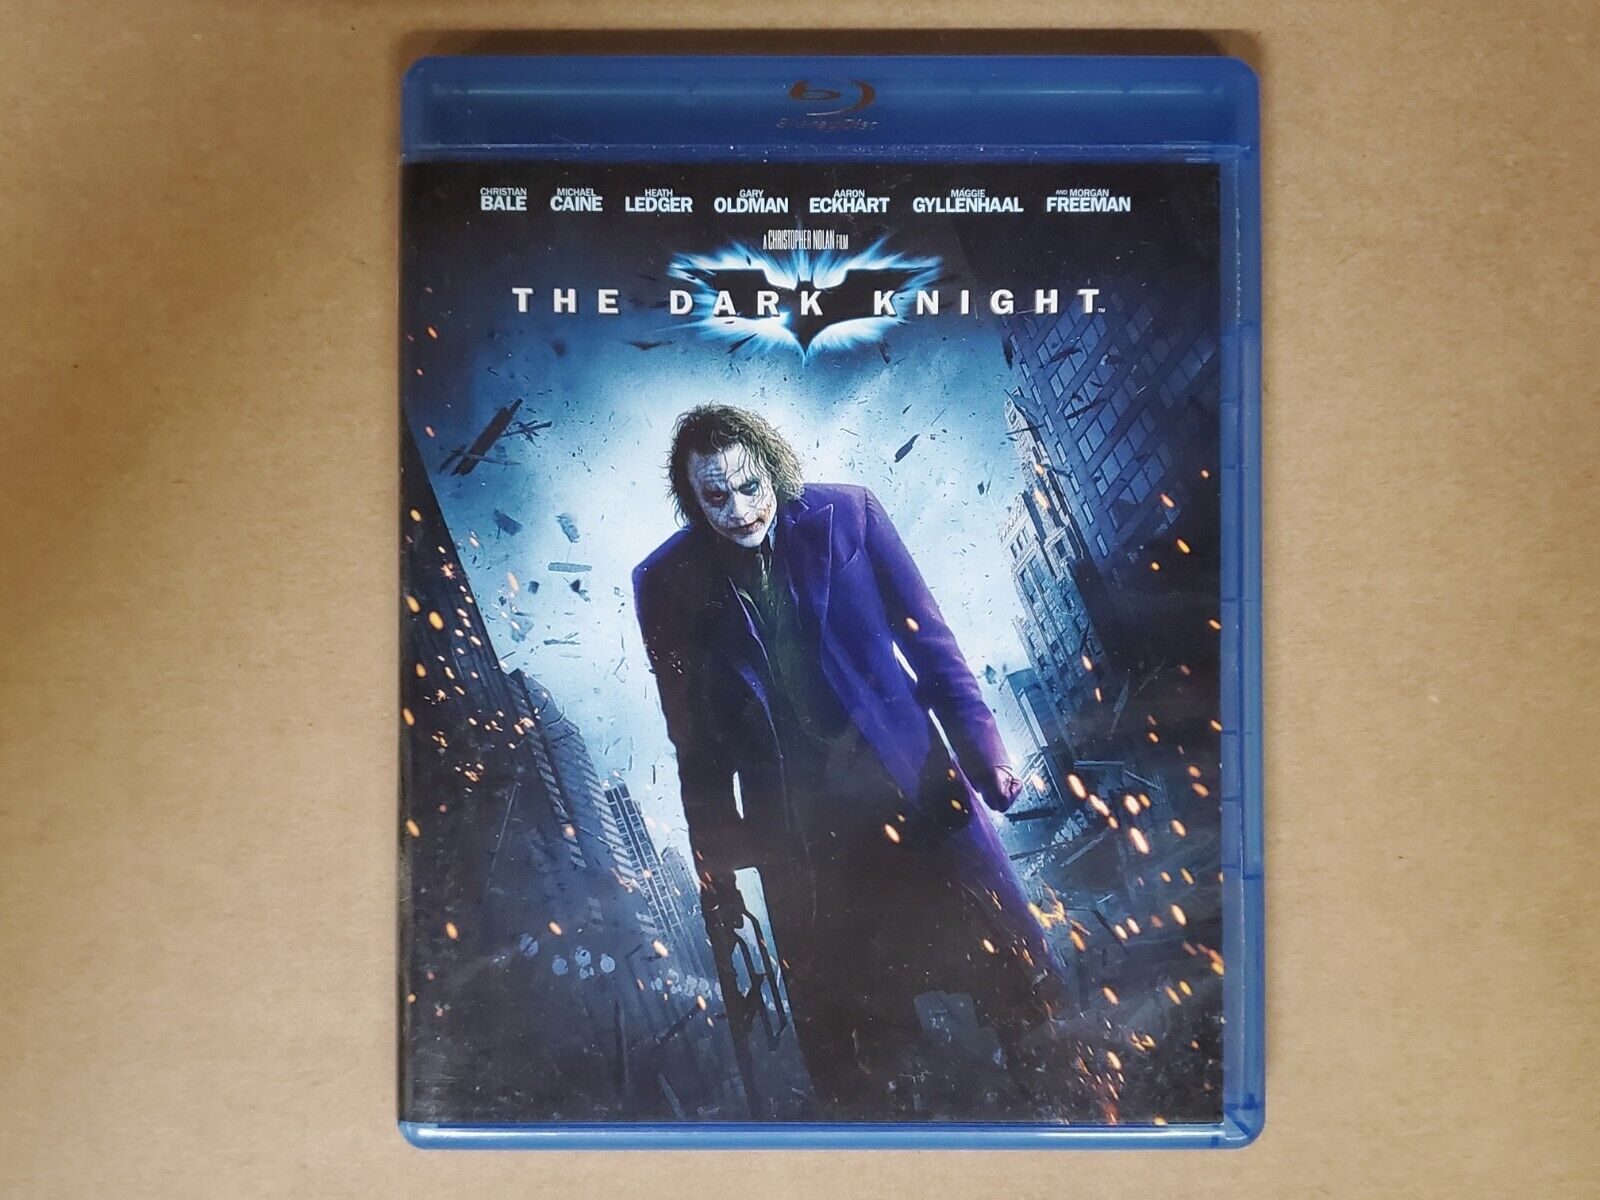 THE DARK KNIGHT 2008 BLU-RAY 2 DISC SPECIAL EDITION SET JOKER COVER